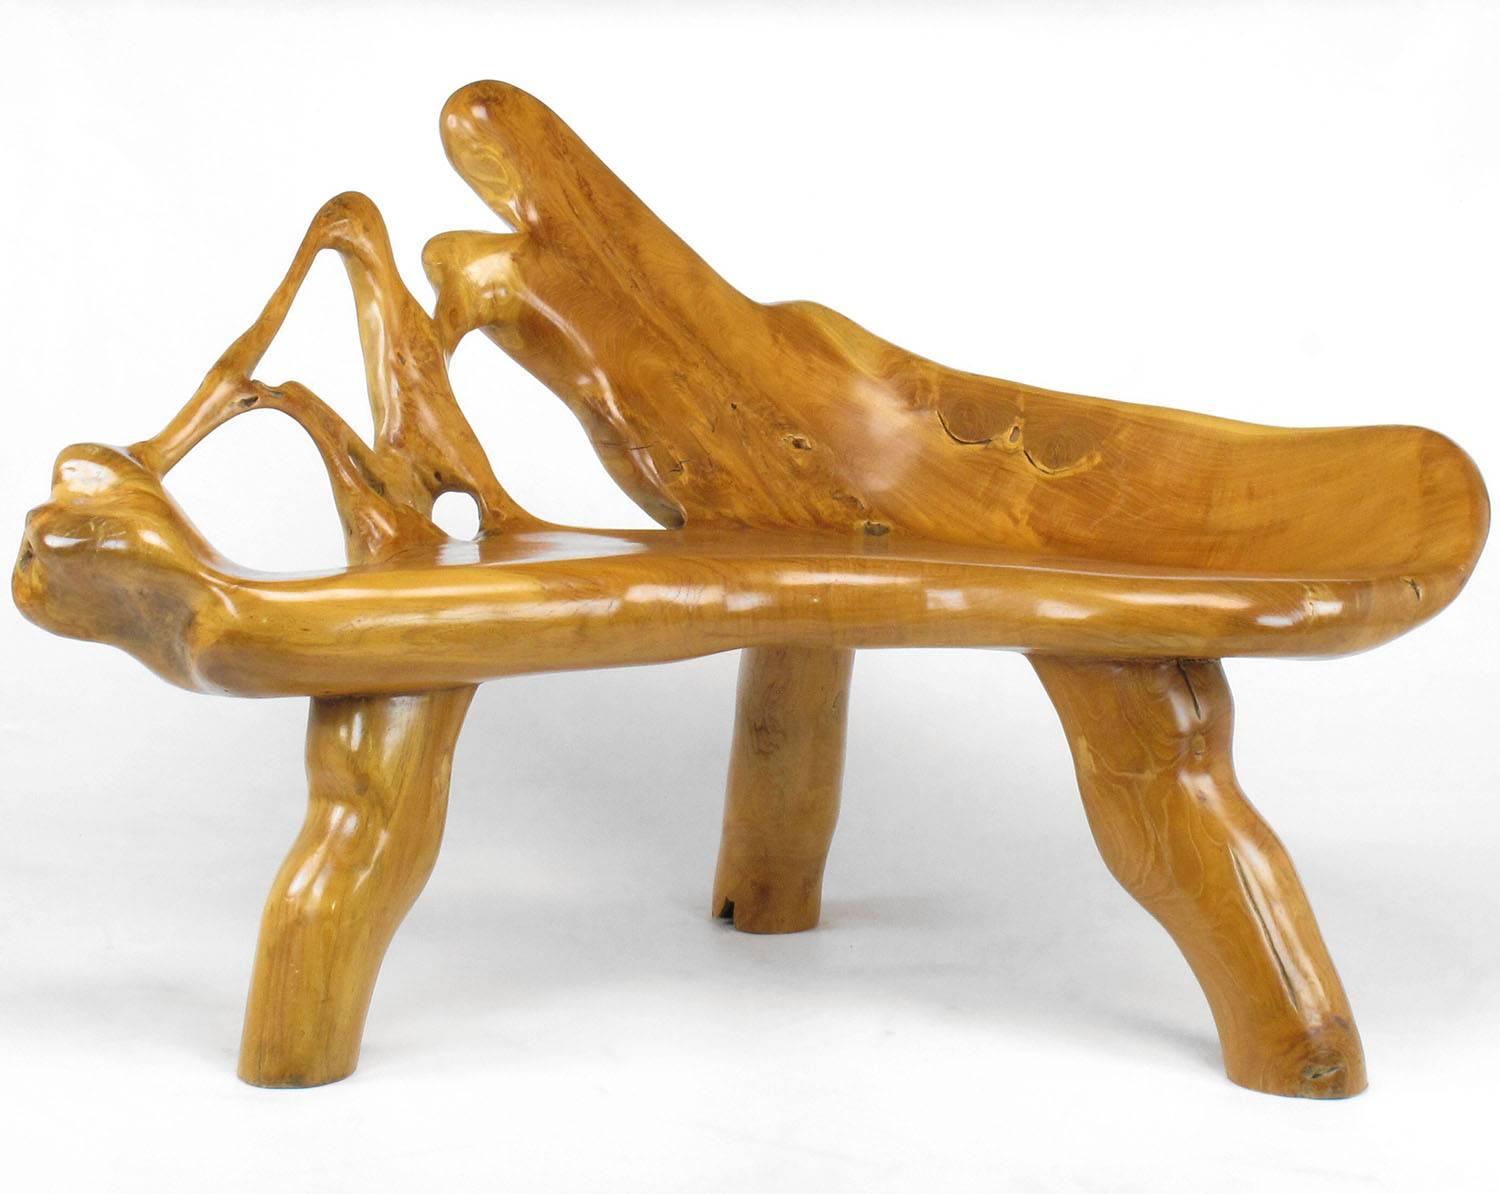 Excellent organic form teak three-leg root bench in the shape of a boomerang. Finished in a medium gloss that brings out all the beautiful wood grain. Perfect for a corner space or as a stand alone bench. Versatile piece that can work in a modern as